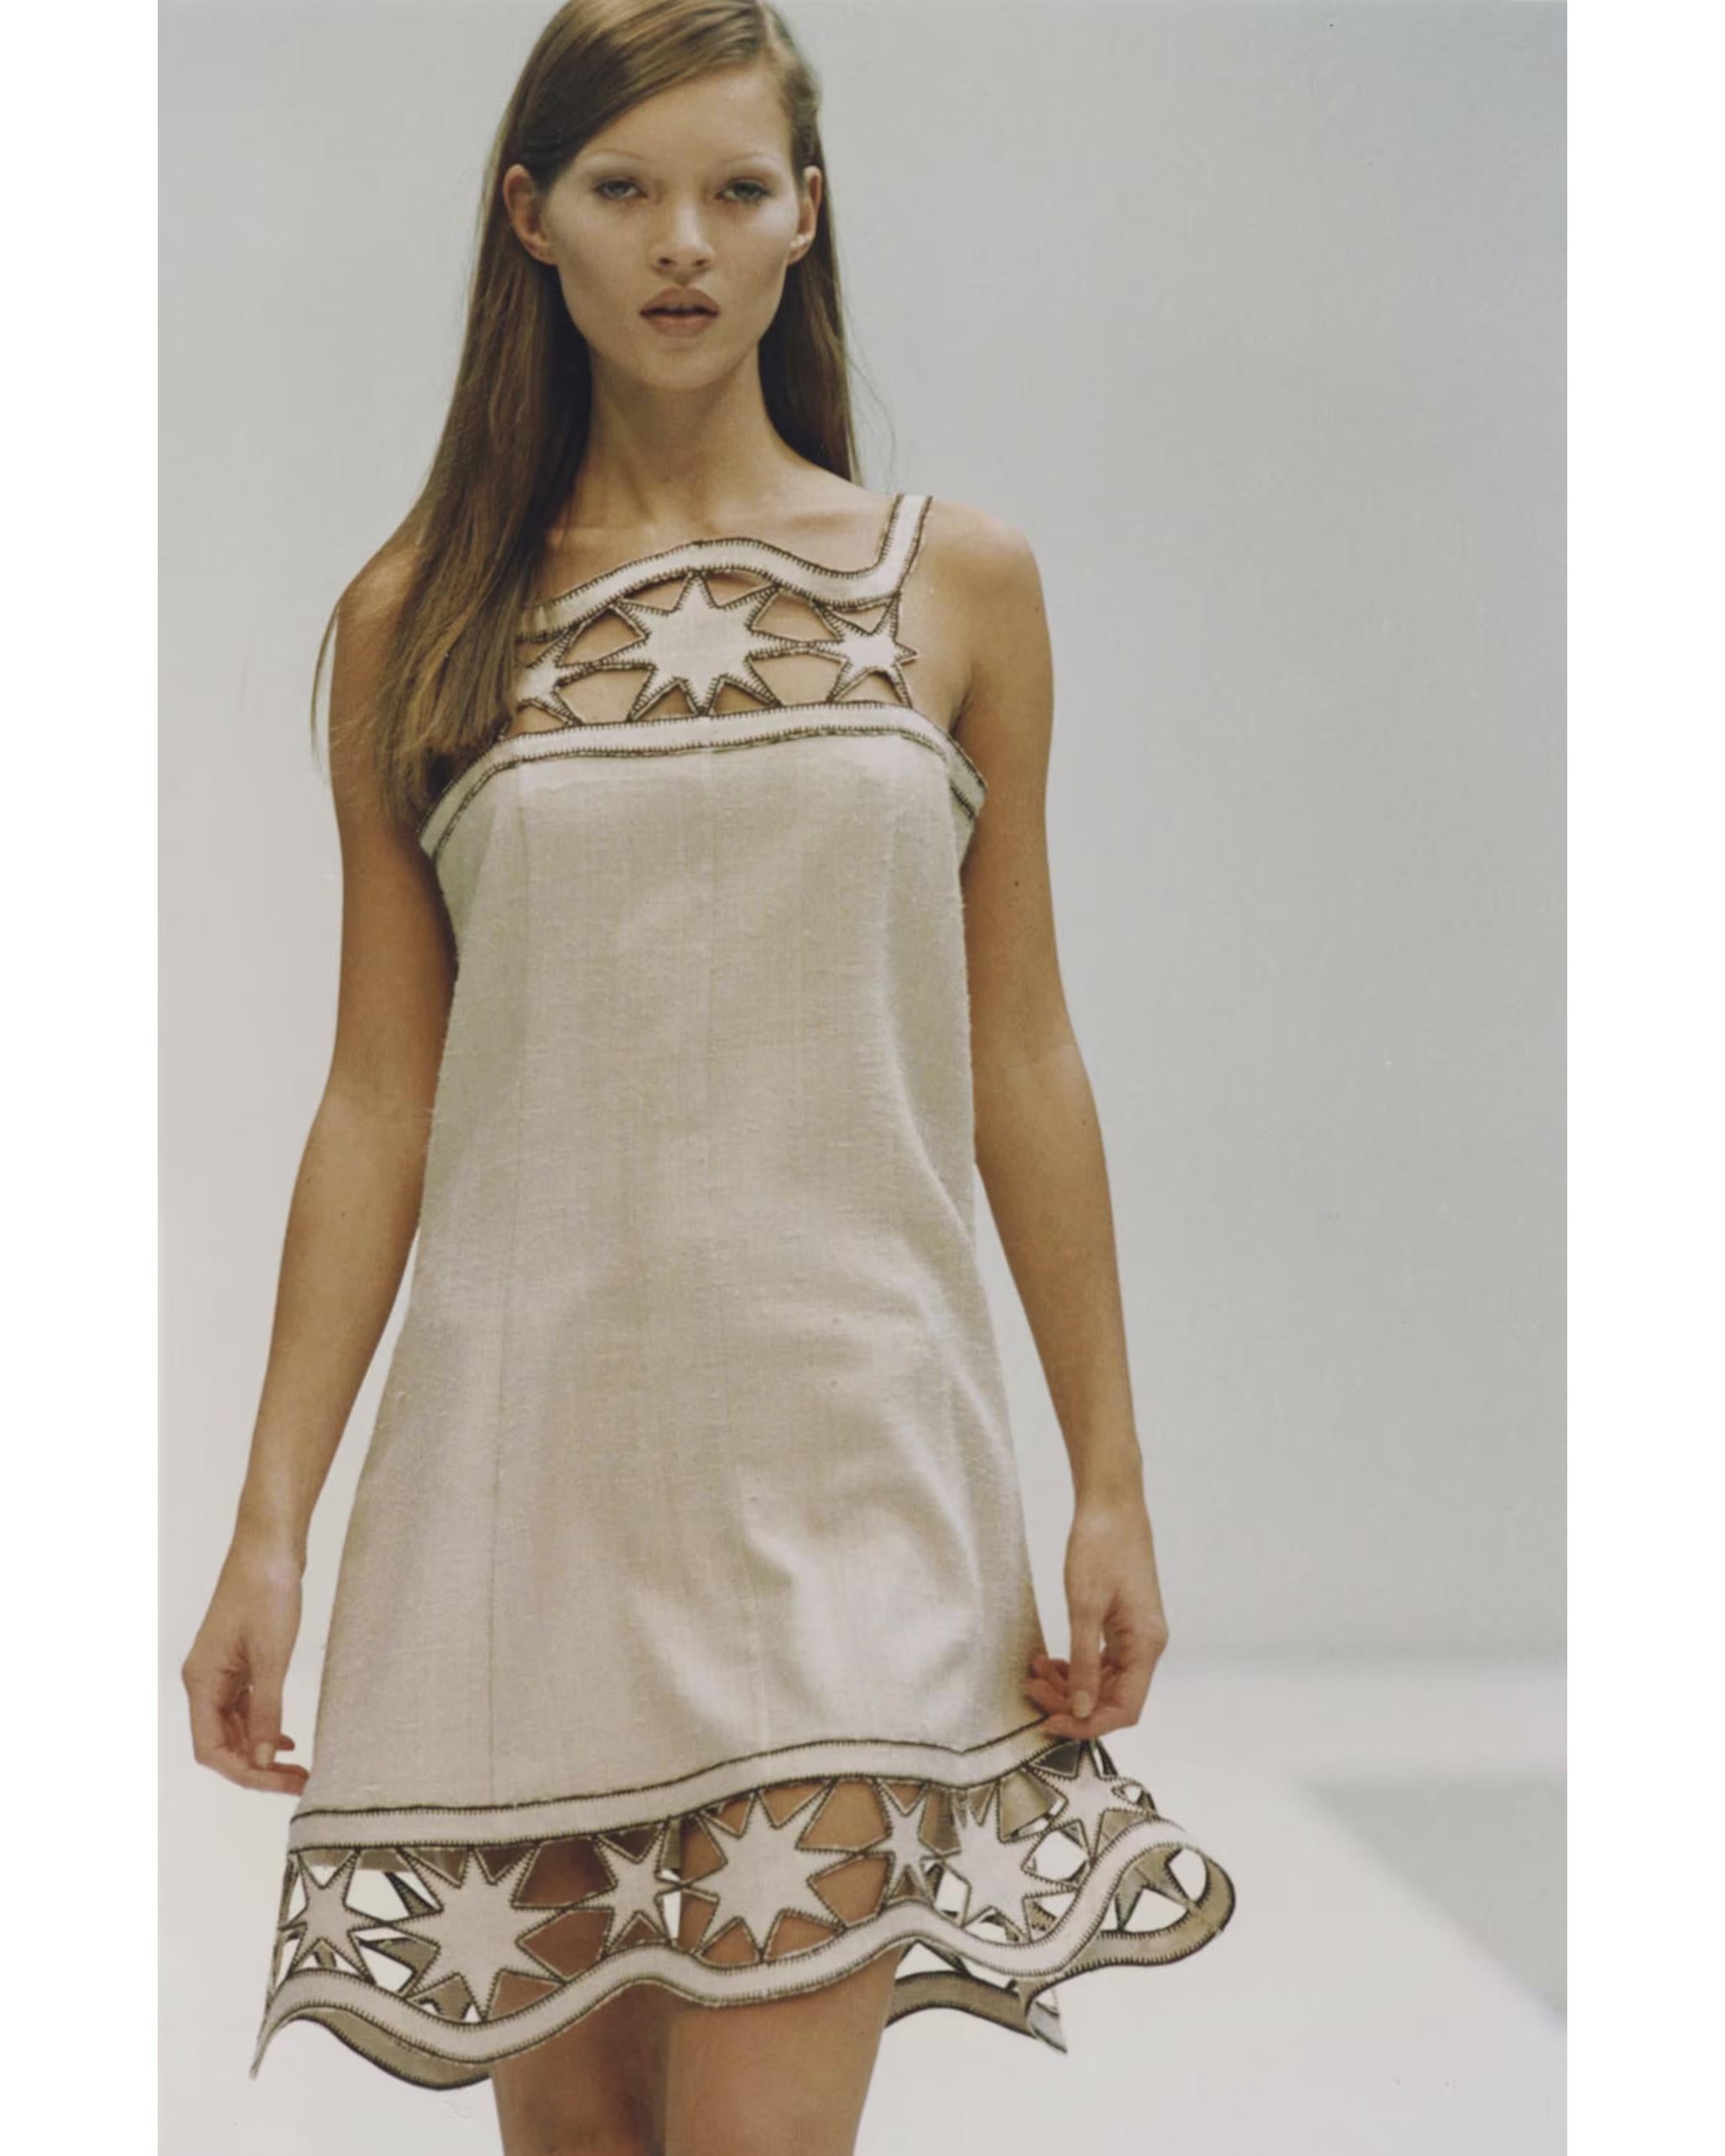 S/S 1993 Prada by Miuccia Prada toffee-colored star cutout dress. Mini dress with dark brown contrast stitched trim, featuring cutout stars at bust and hem. As seen on the runway on Kate Moss (Look 27). Designed with very soft 100% Silk that is